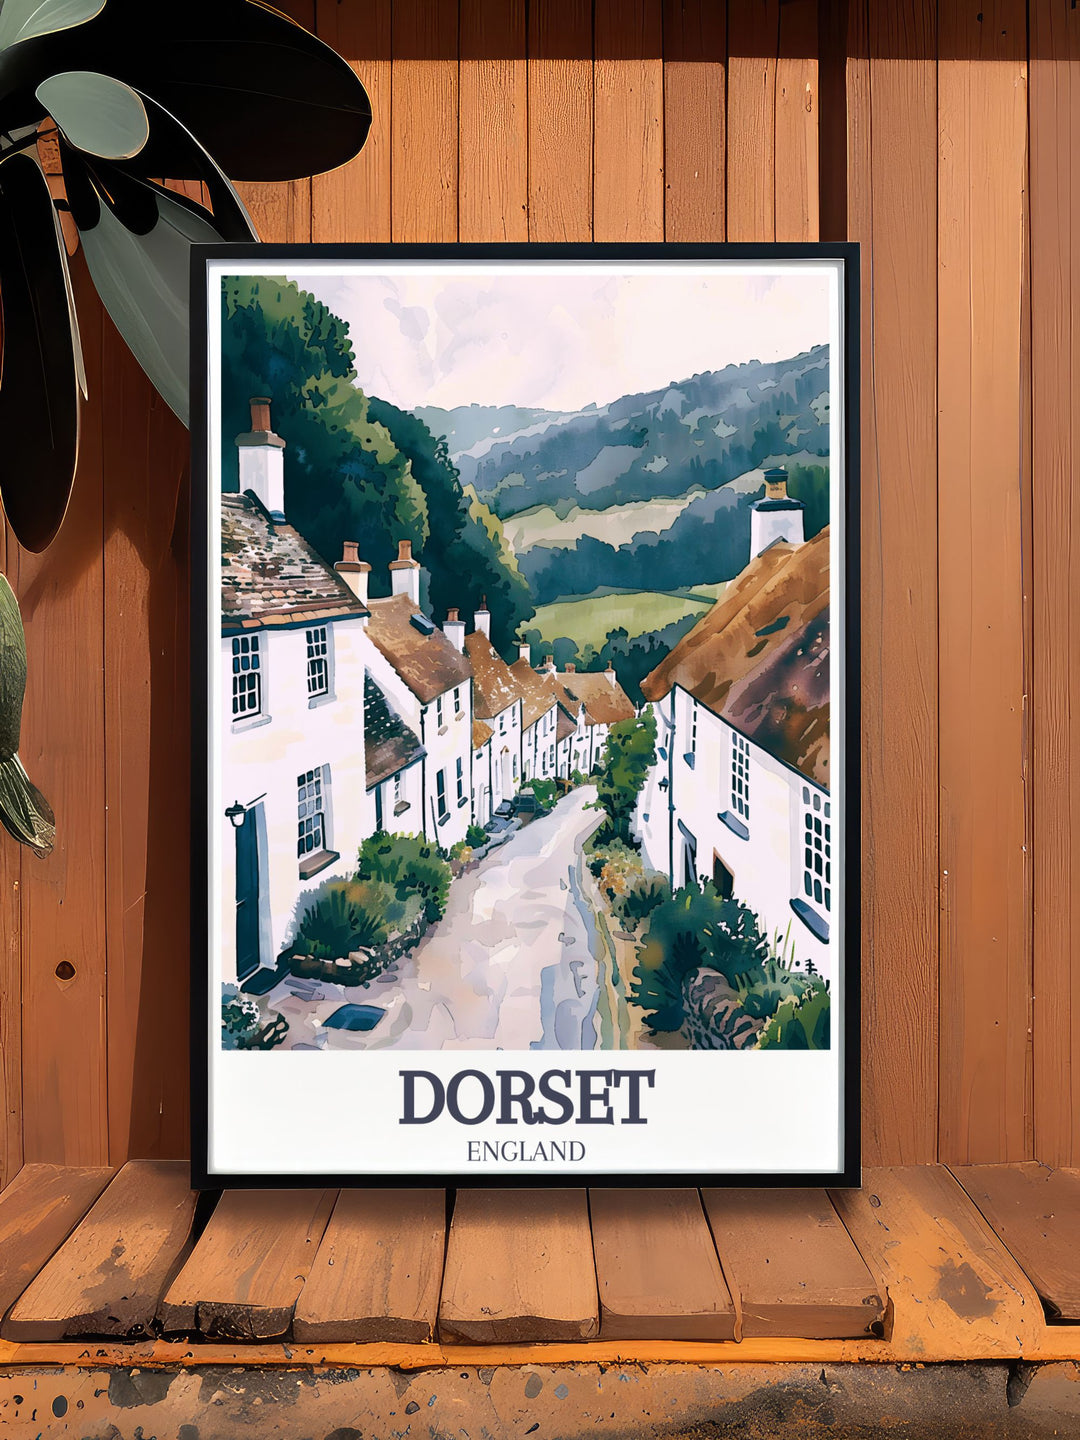 Featuring the picturesque Gold Hill, this art print highlights the villages unique charm and historical significance, perfect for lovers of English rural scenes.